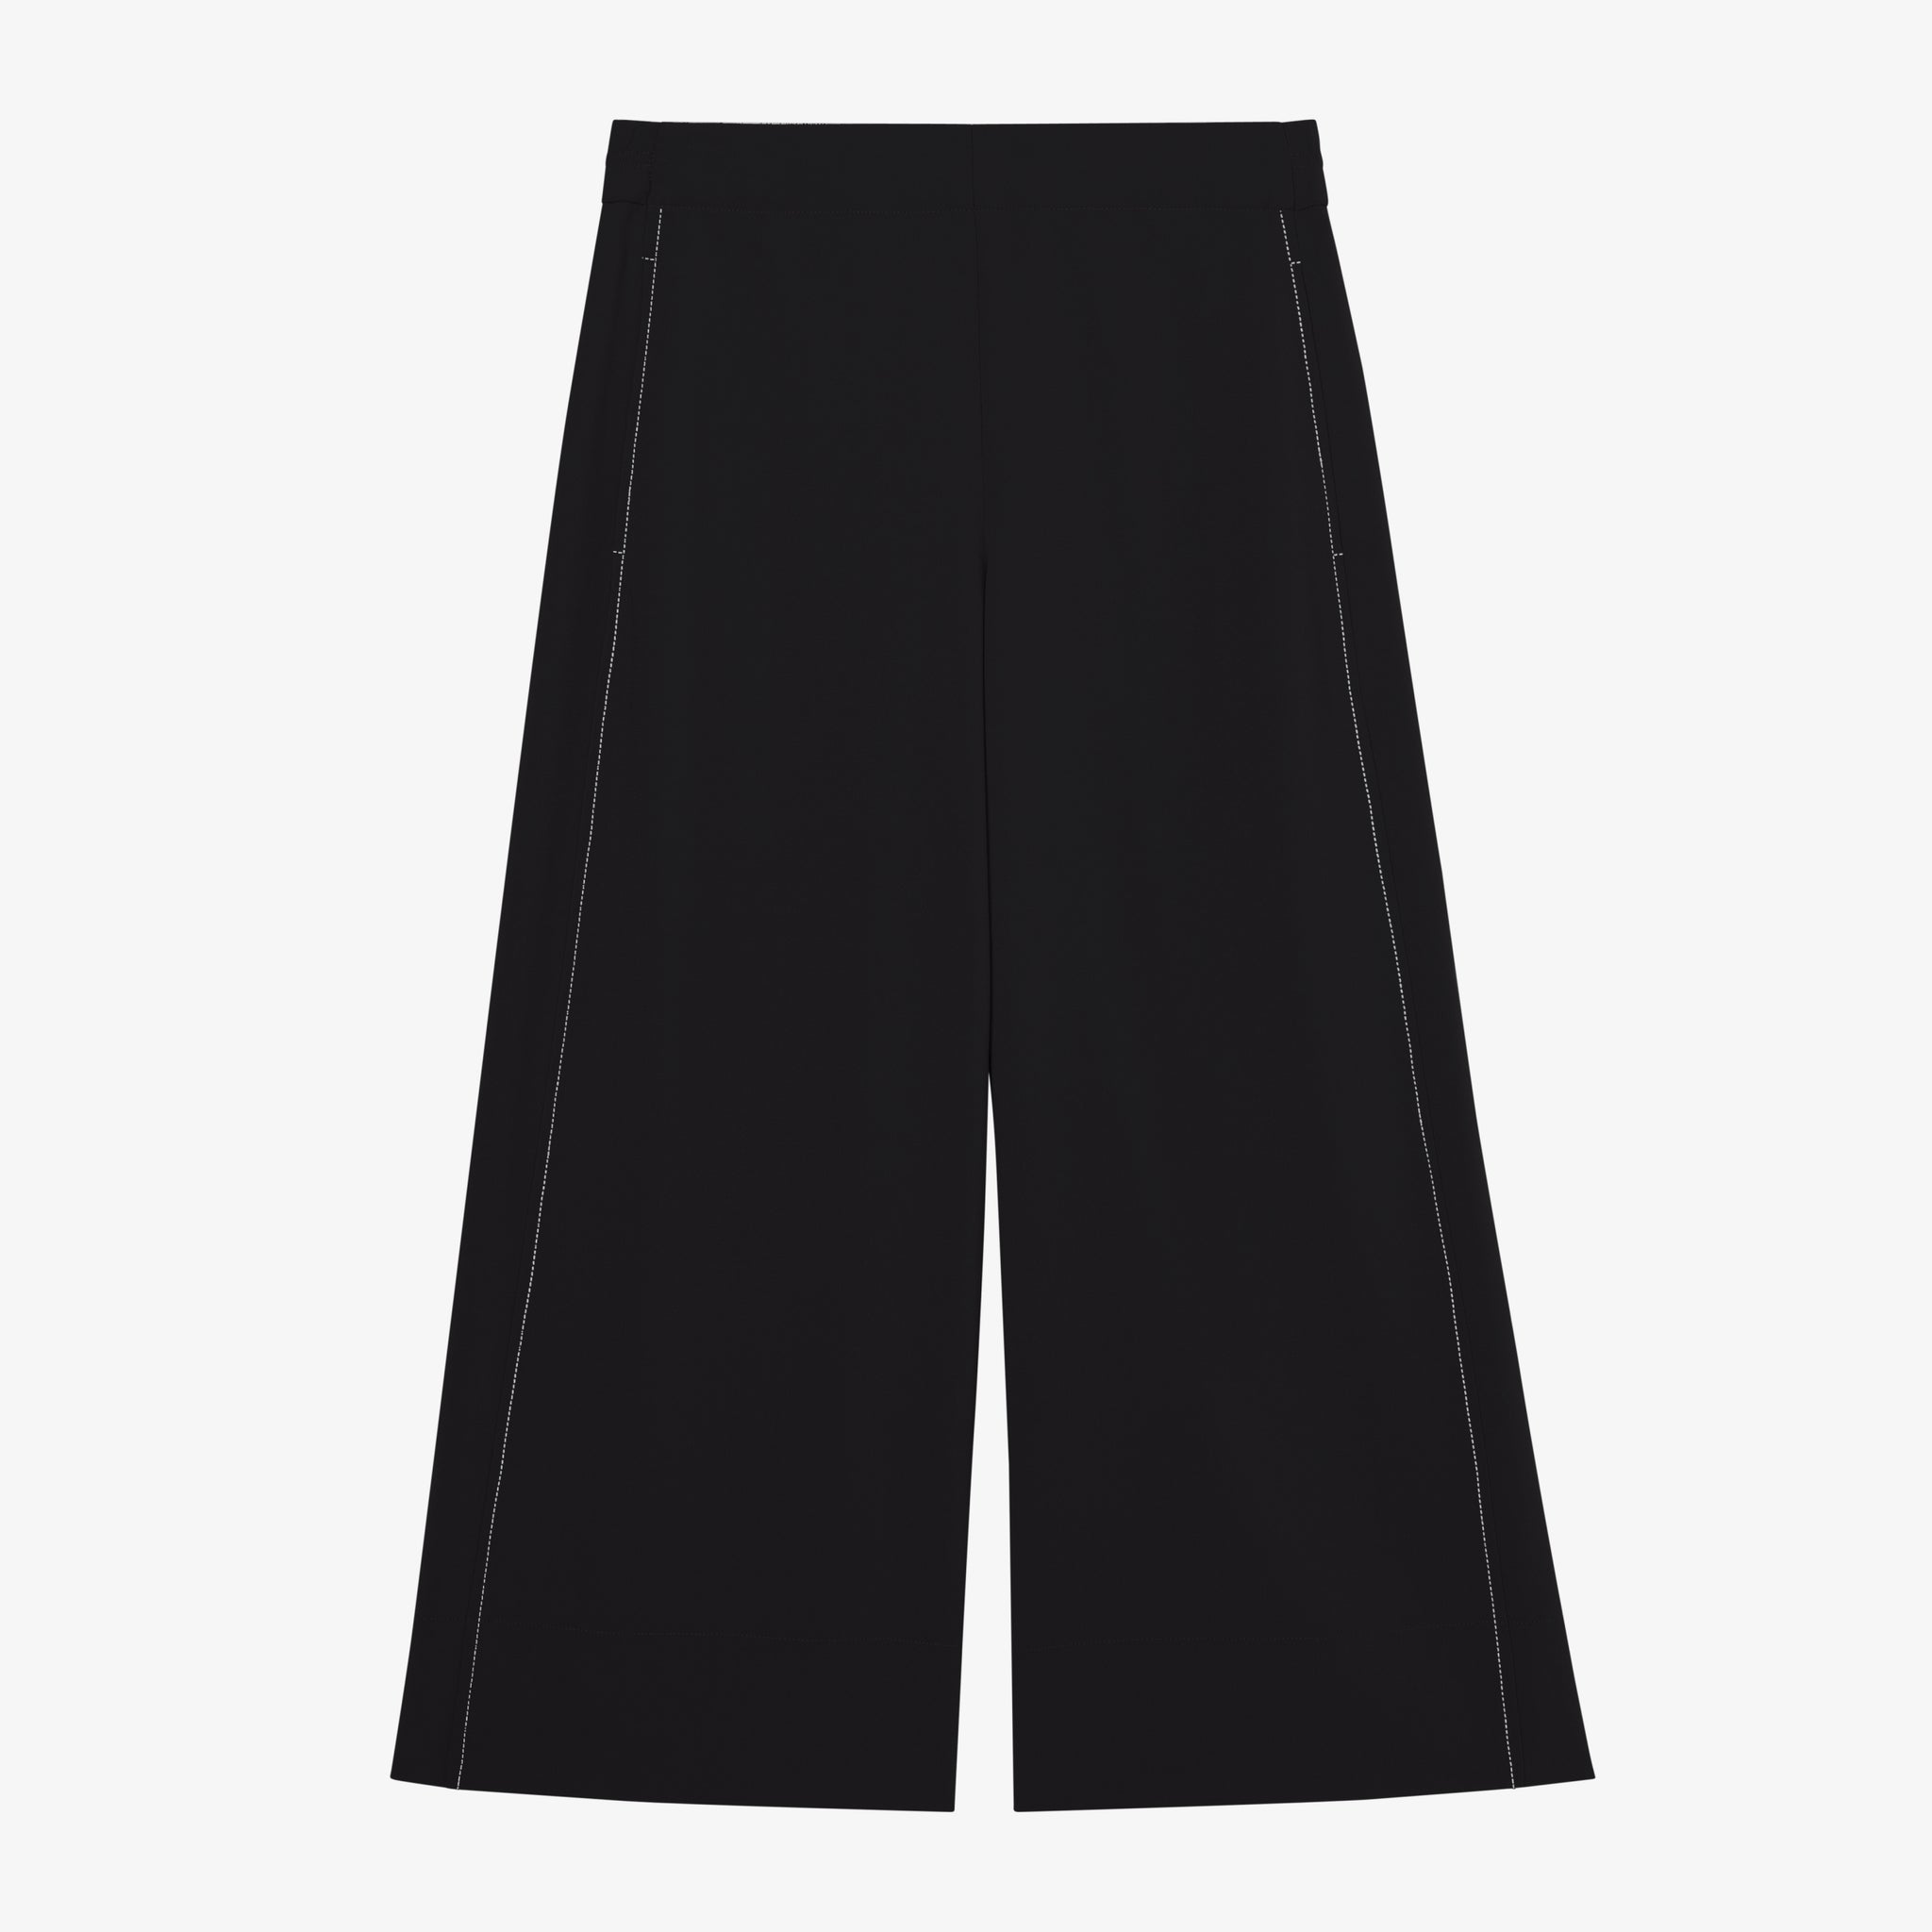 still image of the elena pant in black